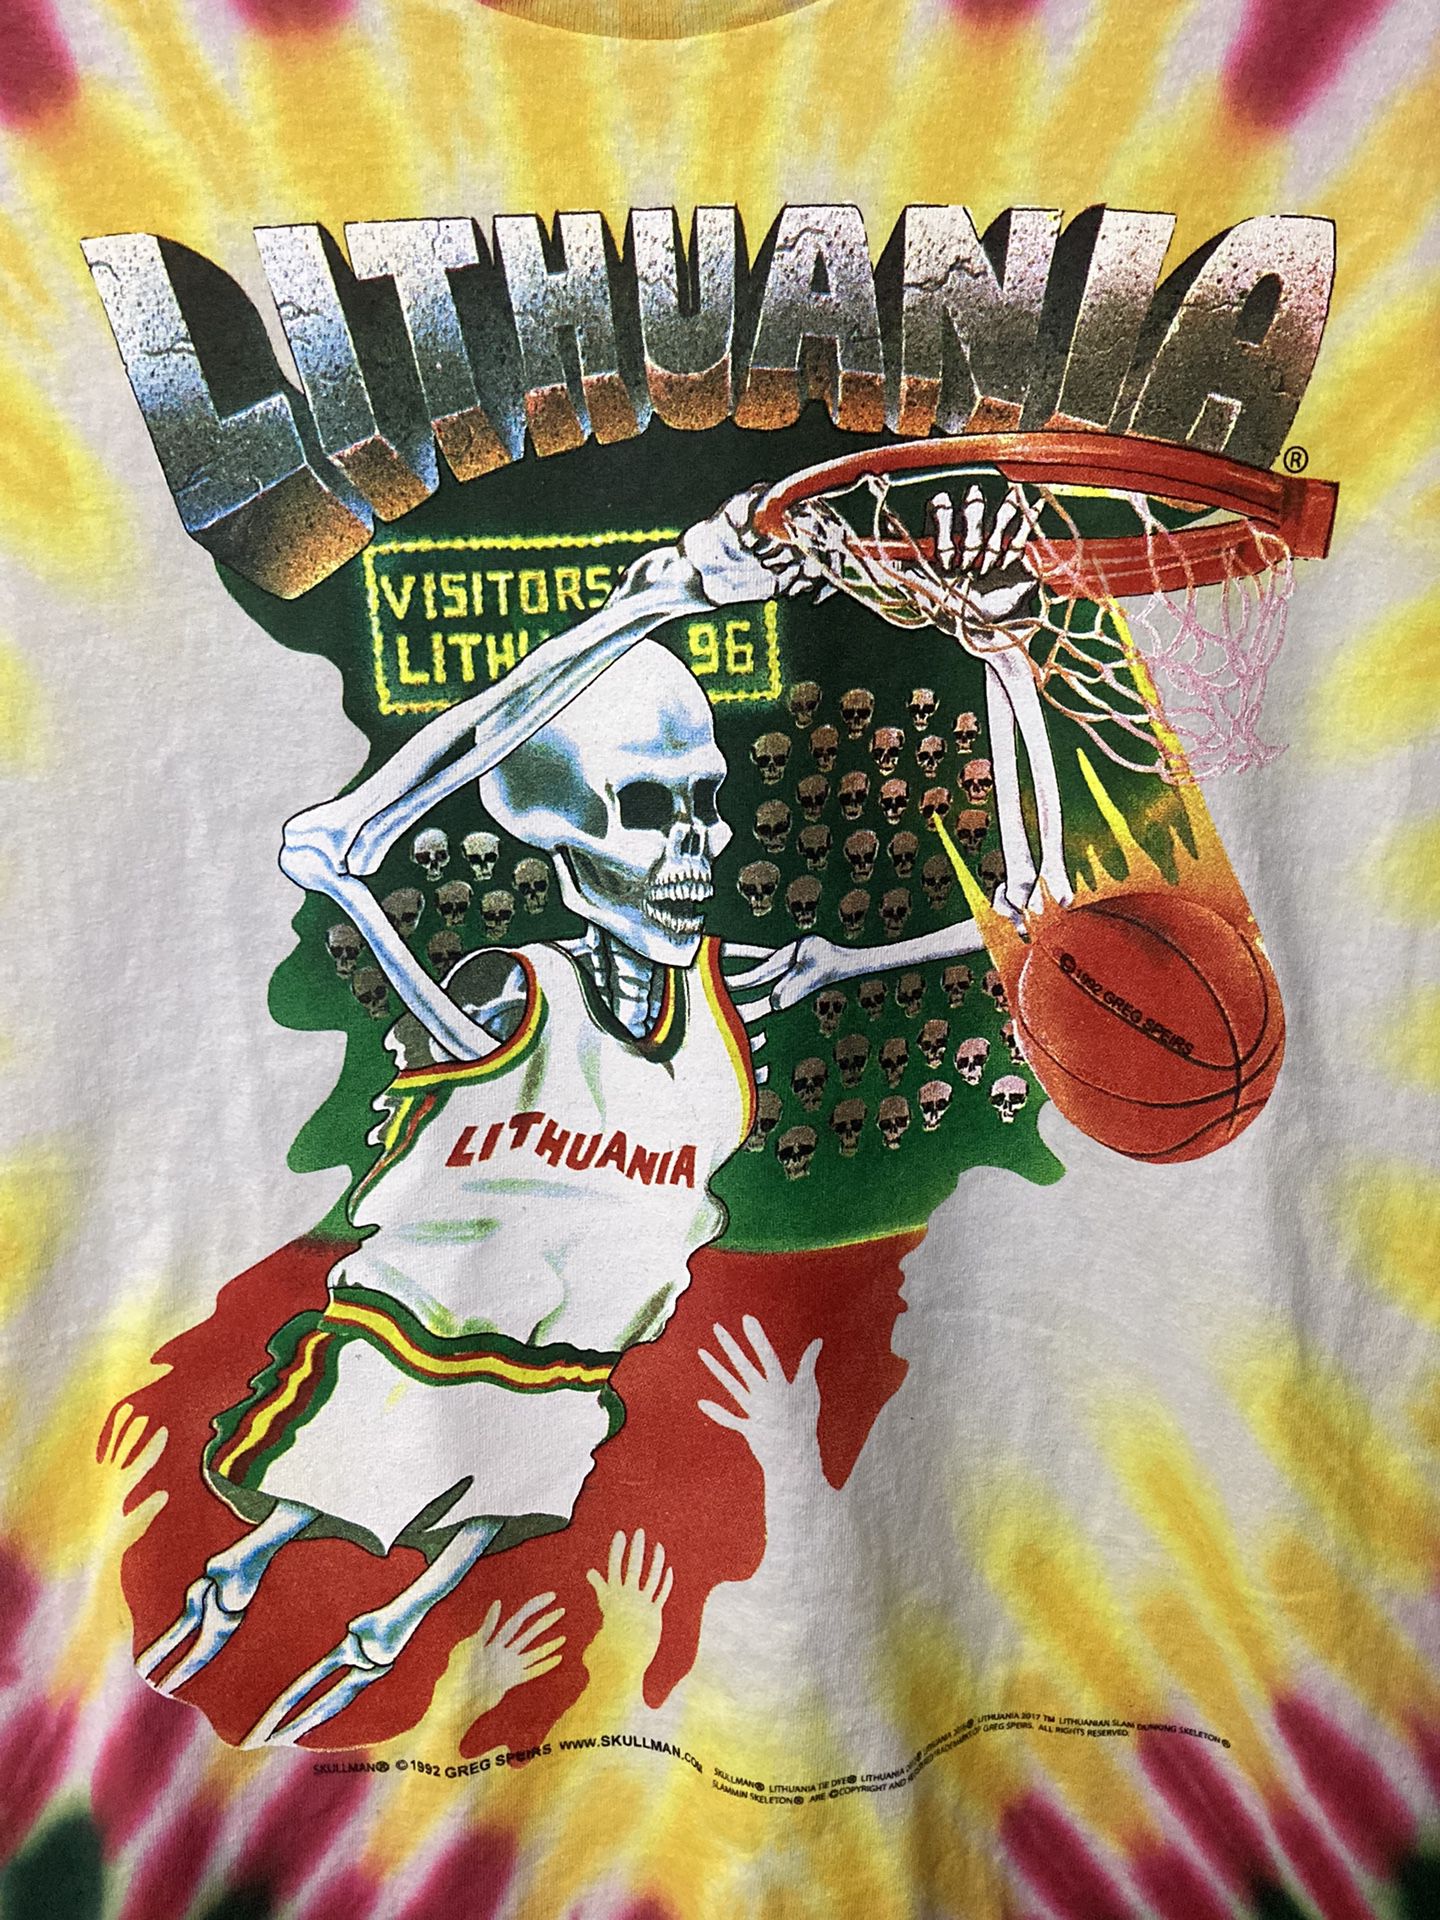 Grateful Dead Lithuania Basketball Bronze Medal Olympic Team Jersey